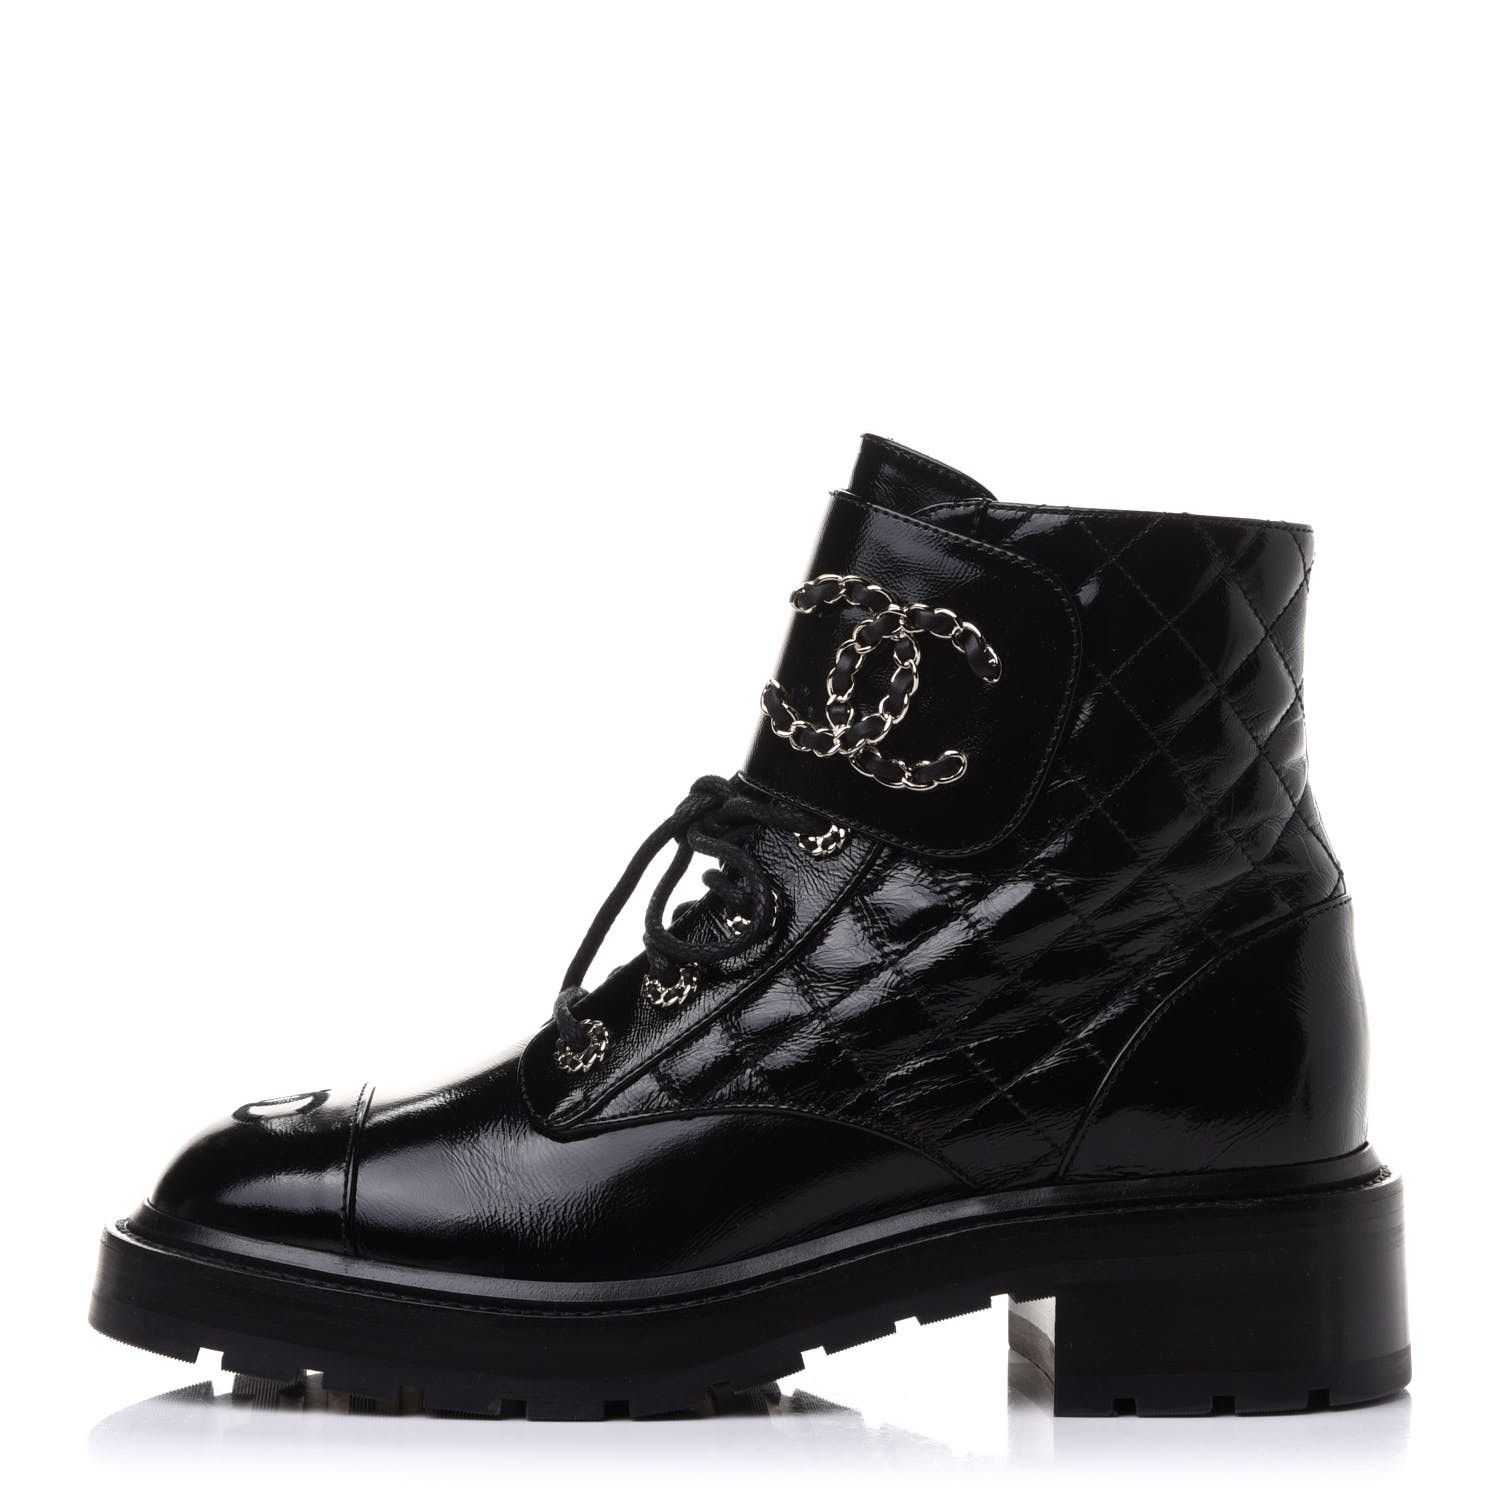 CHANEL

Shiny Calfskin Quilted Lace Up Combat Boots 39 Black | Fashionphile